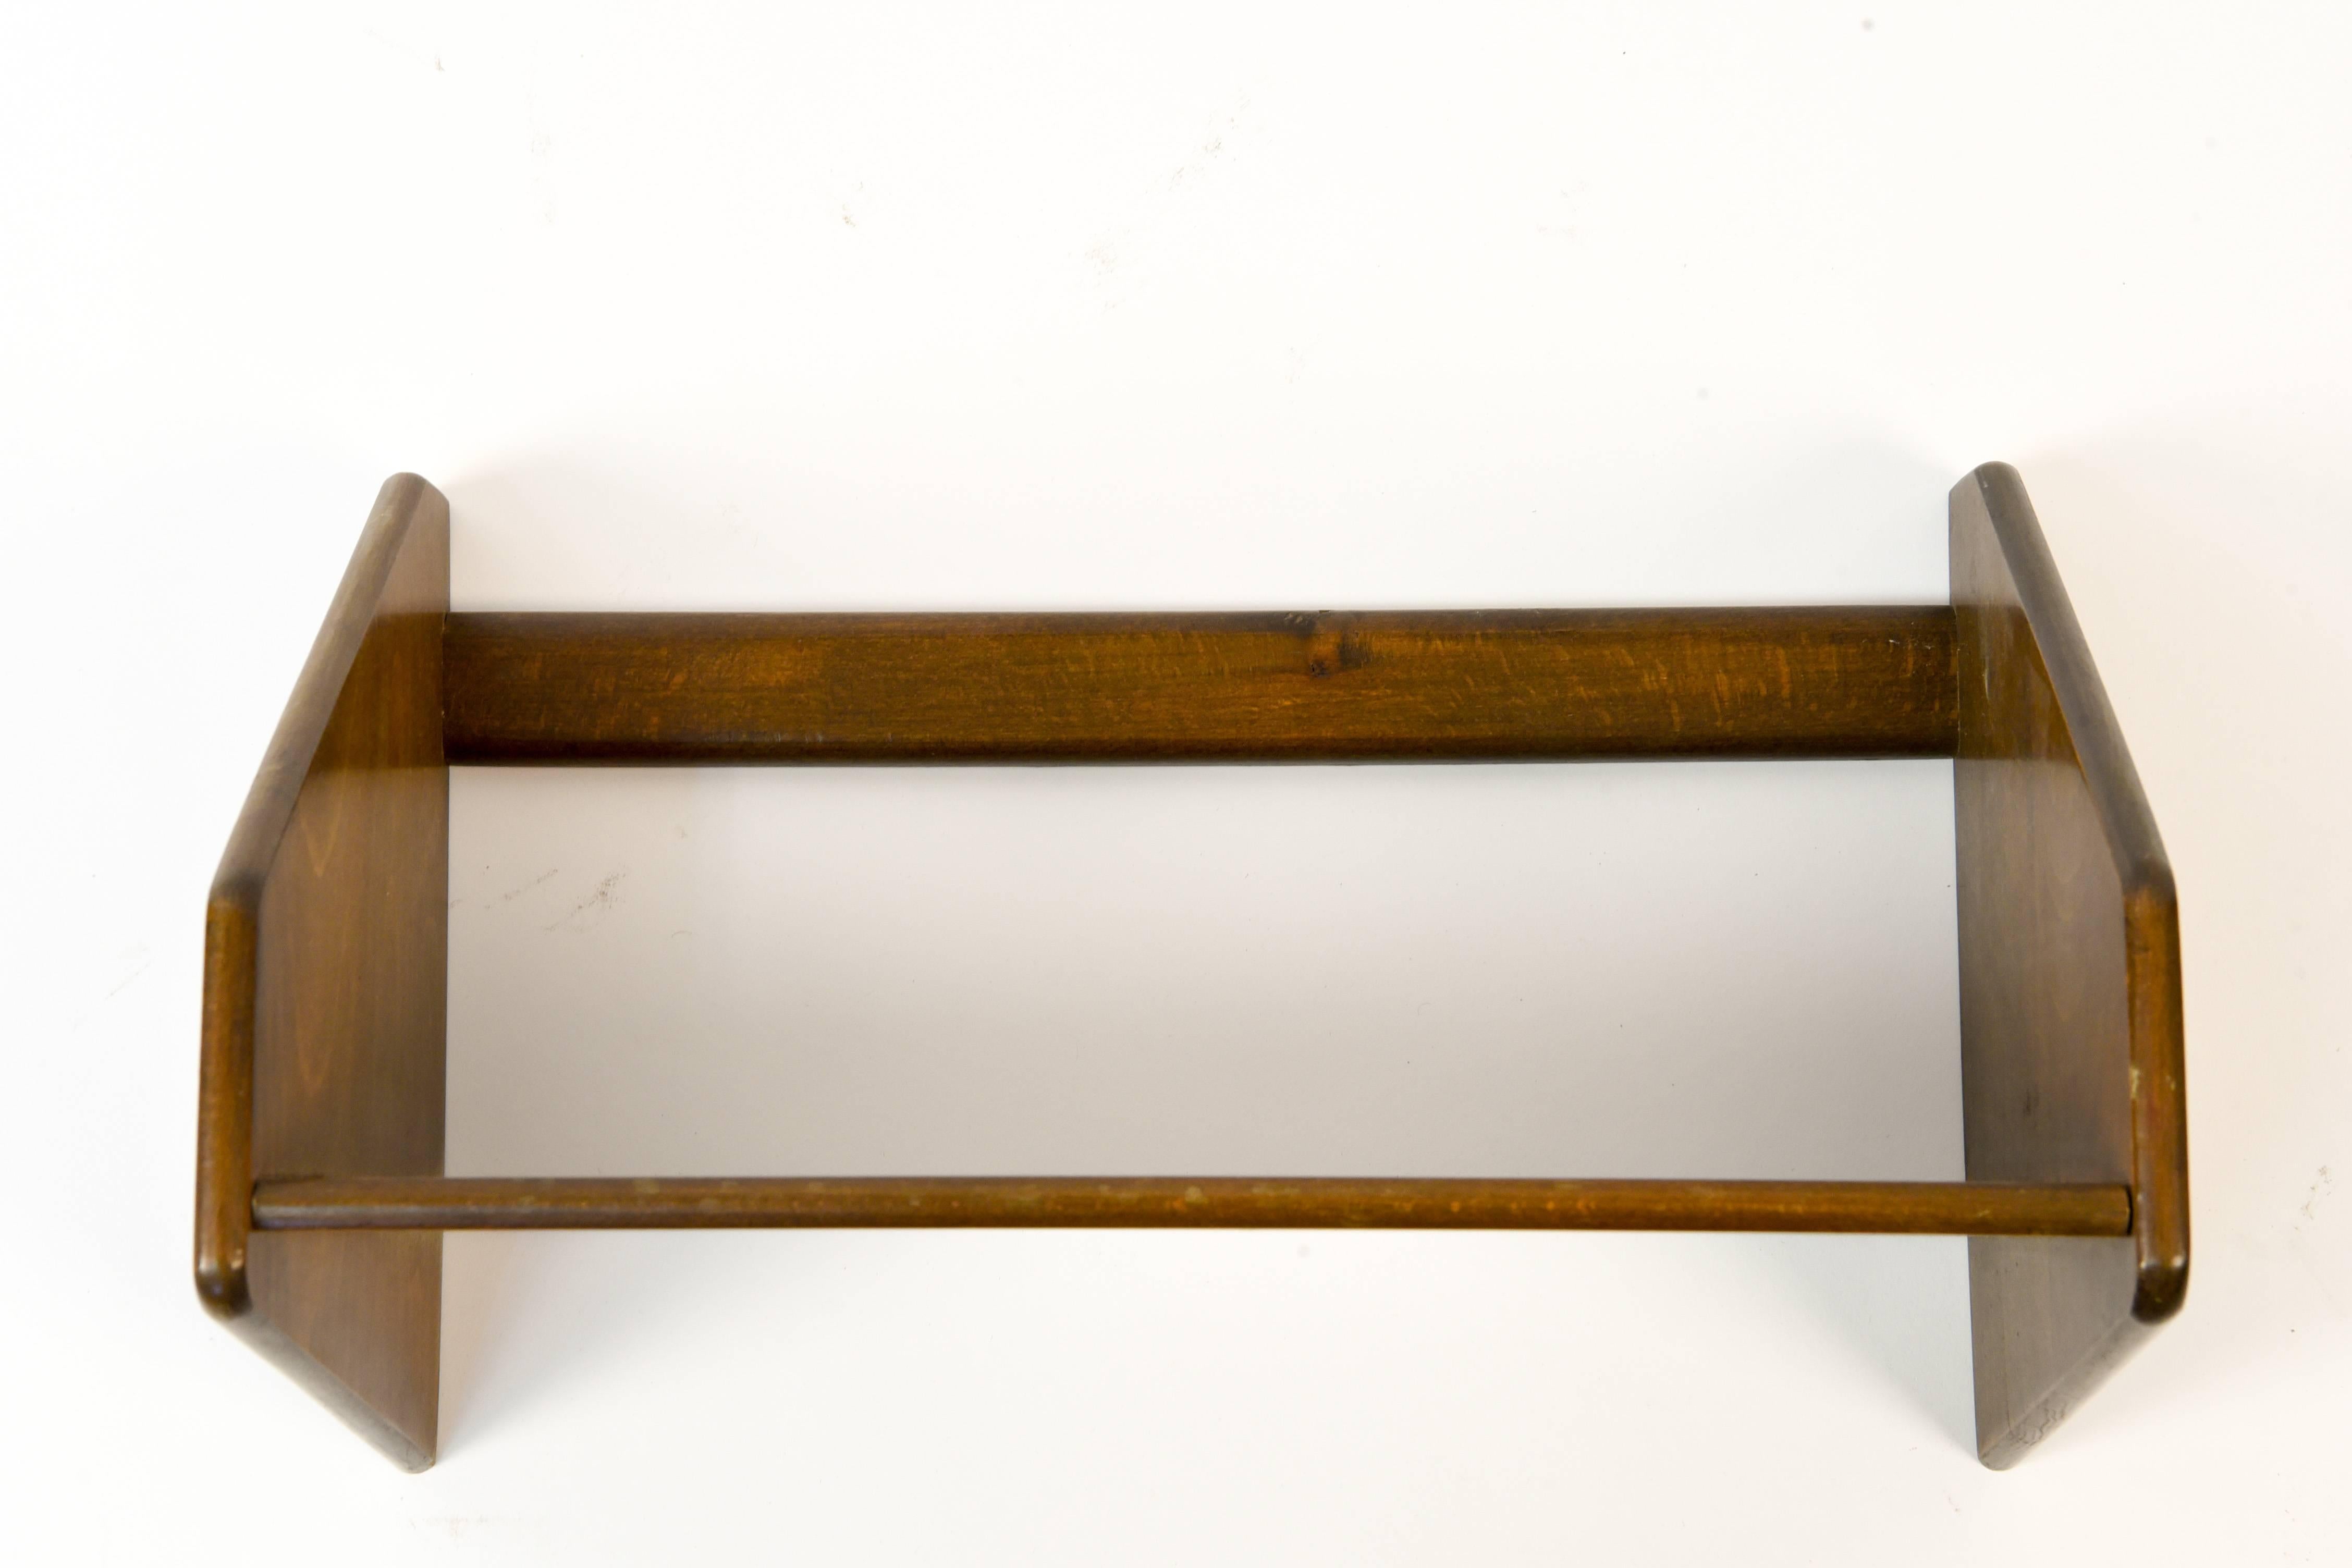 Designed by Hans J. Wegner. Produced by Ry Møbler in Denmark during the 1950s. A great shelf for display.